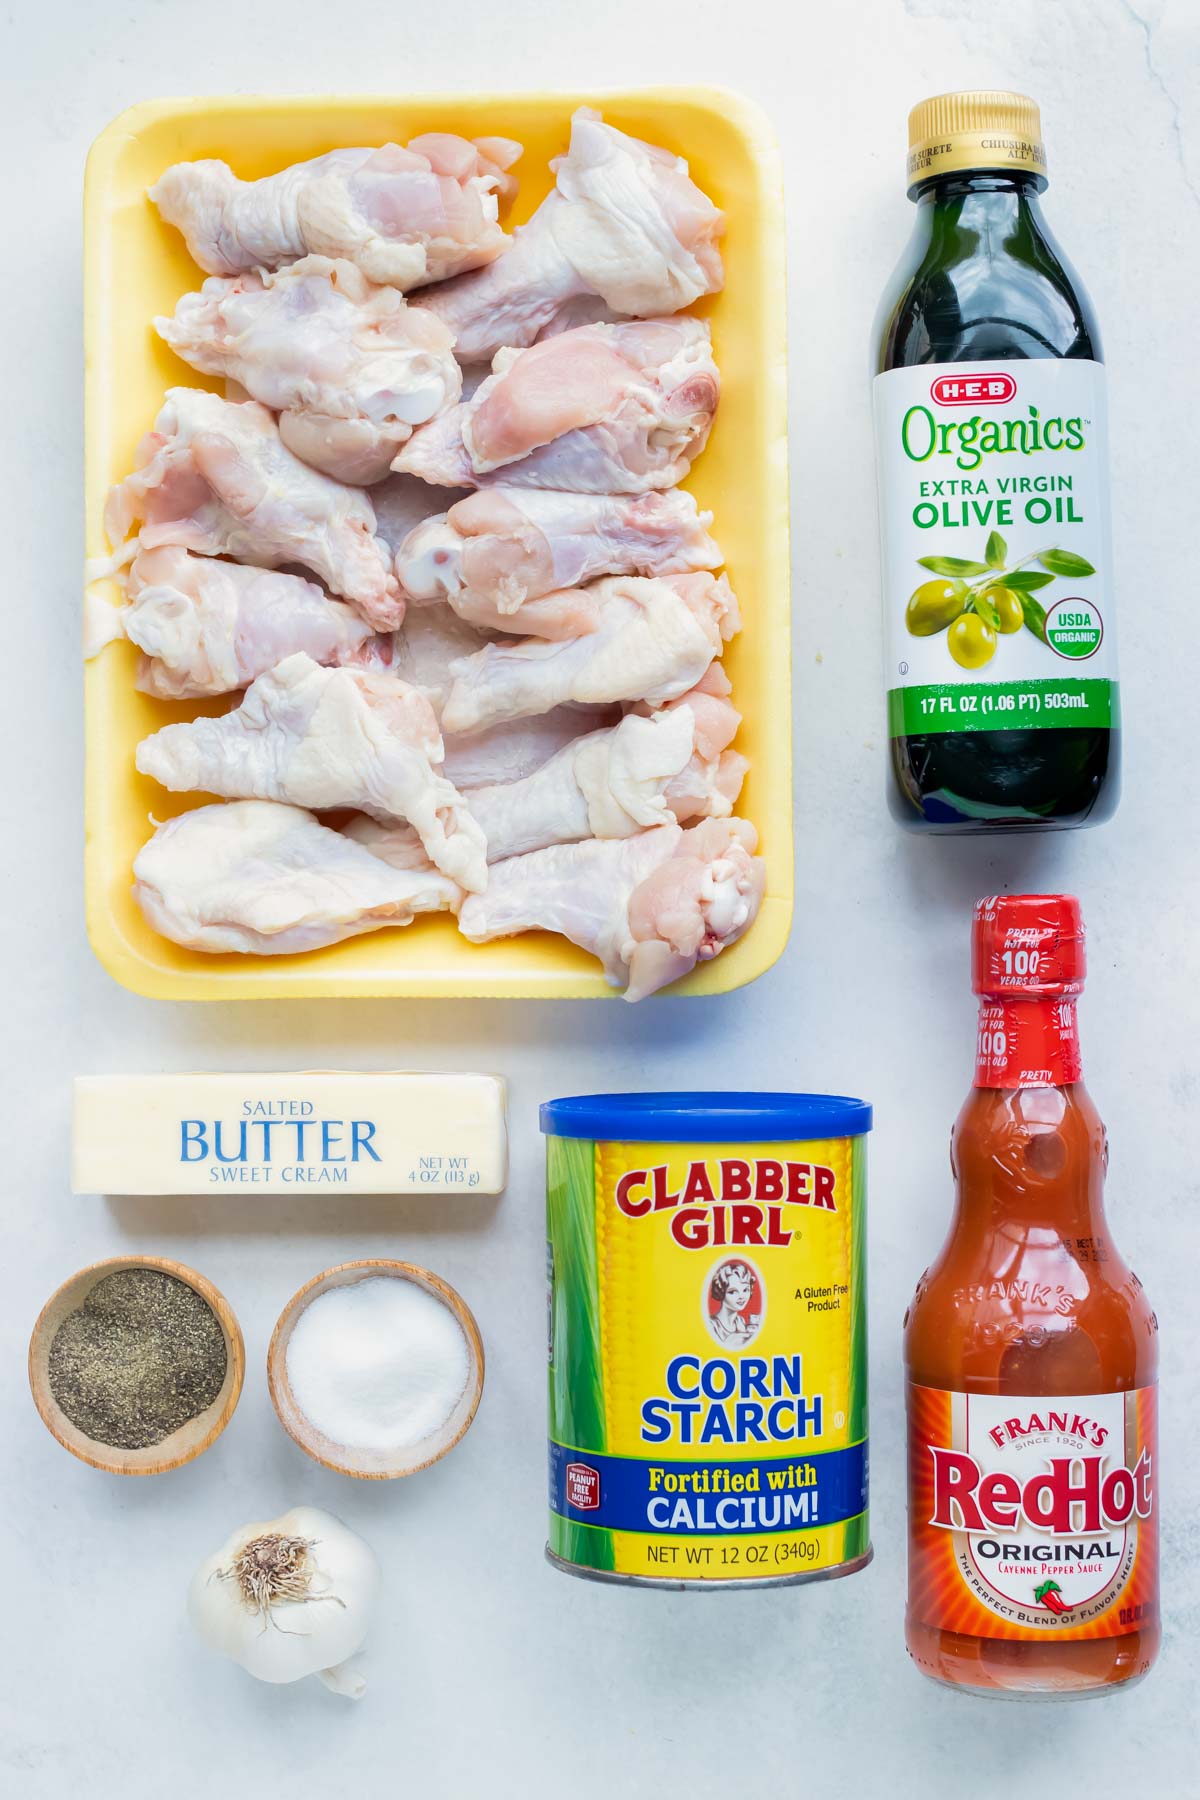 Chicken wings, corn starch, buffalo sauce, salt, pepper, and oil are the ingredients used in this recipe.